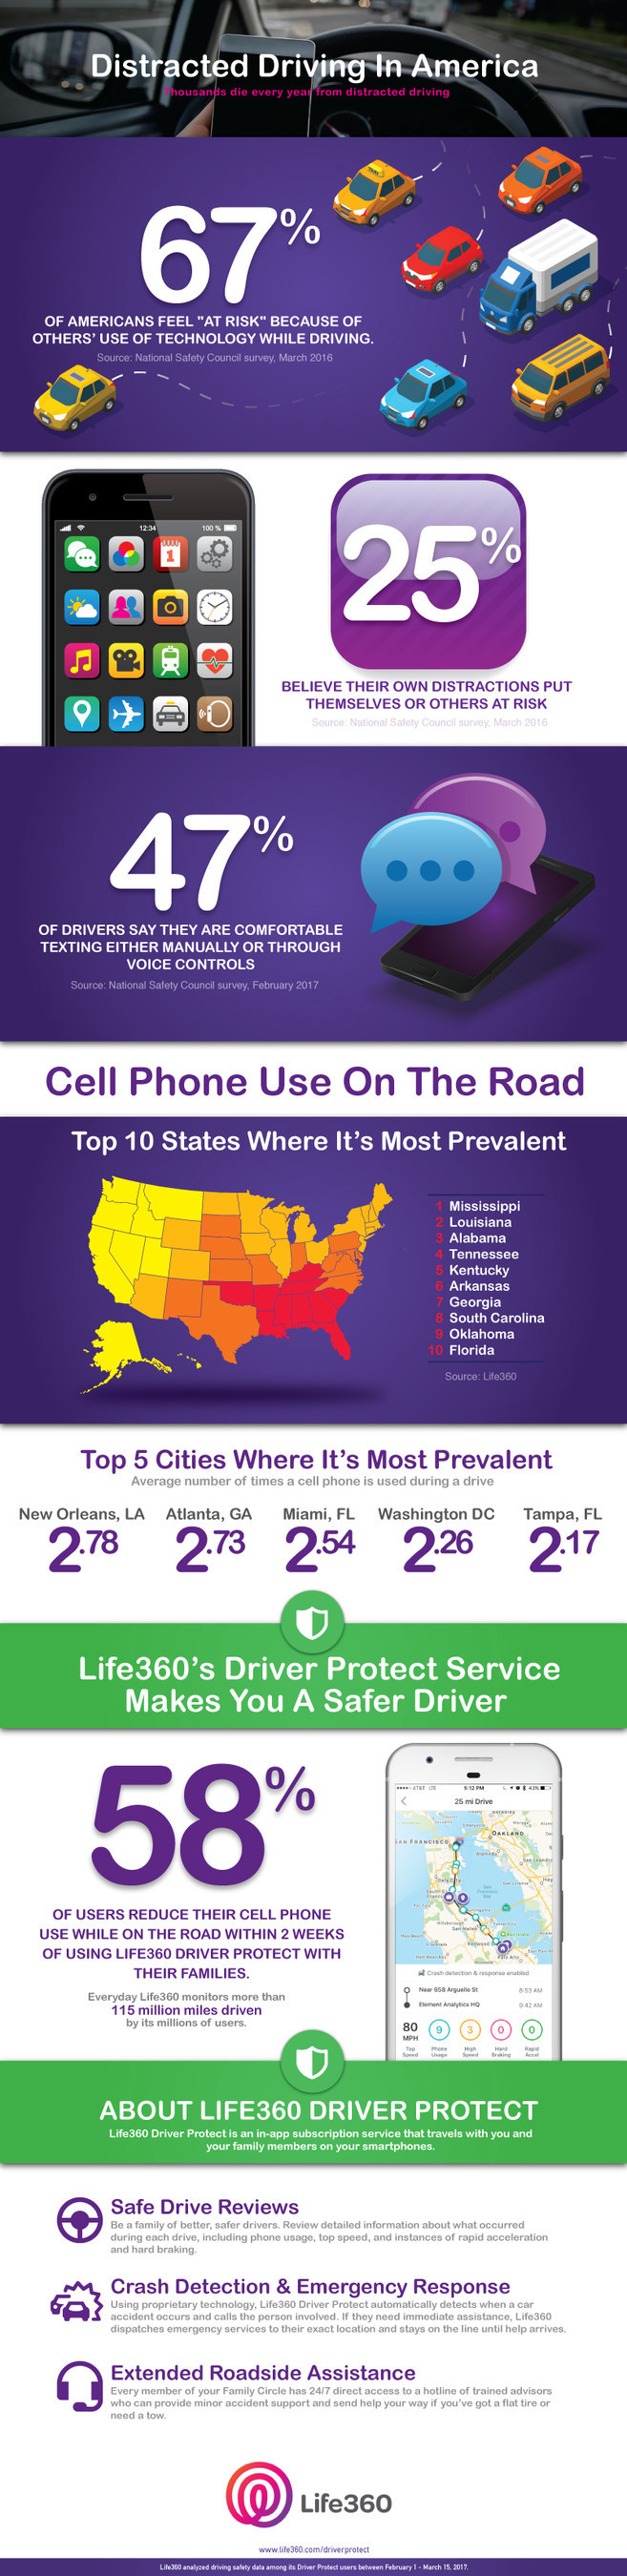 Distracted Driving in America. Infographic by Life360.